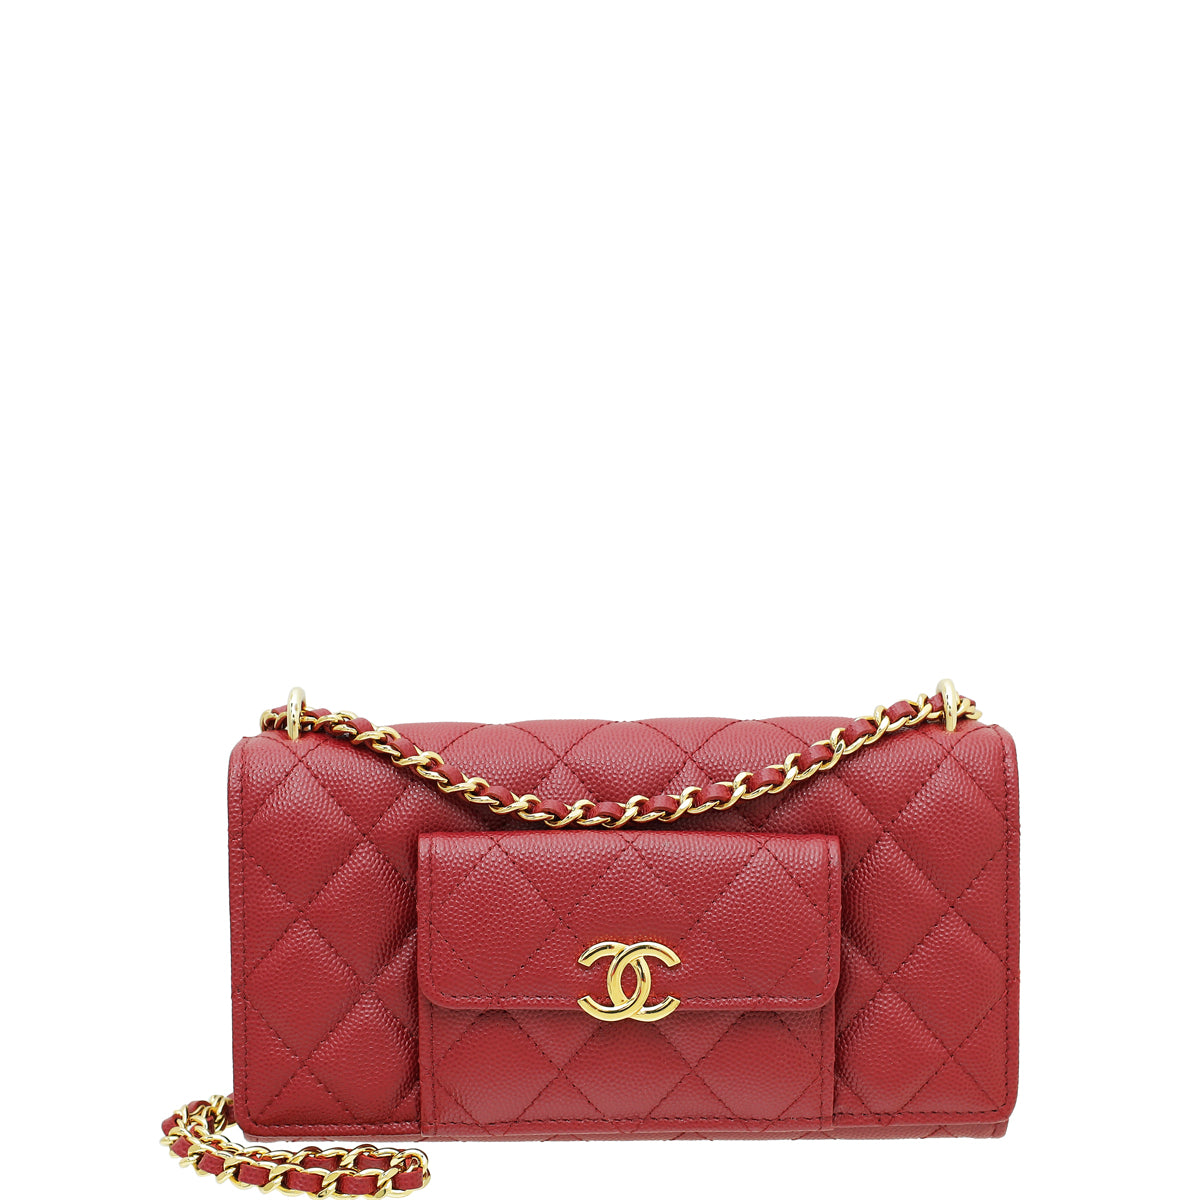 Chanel CoCo Curves Flap Bag